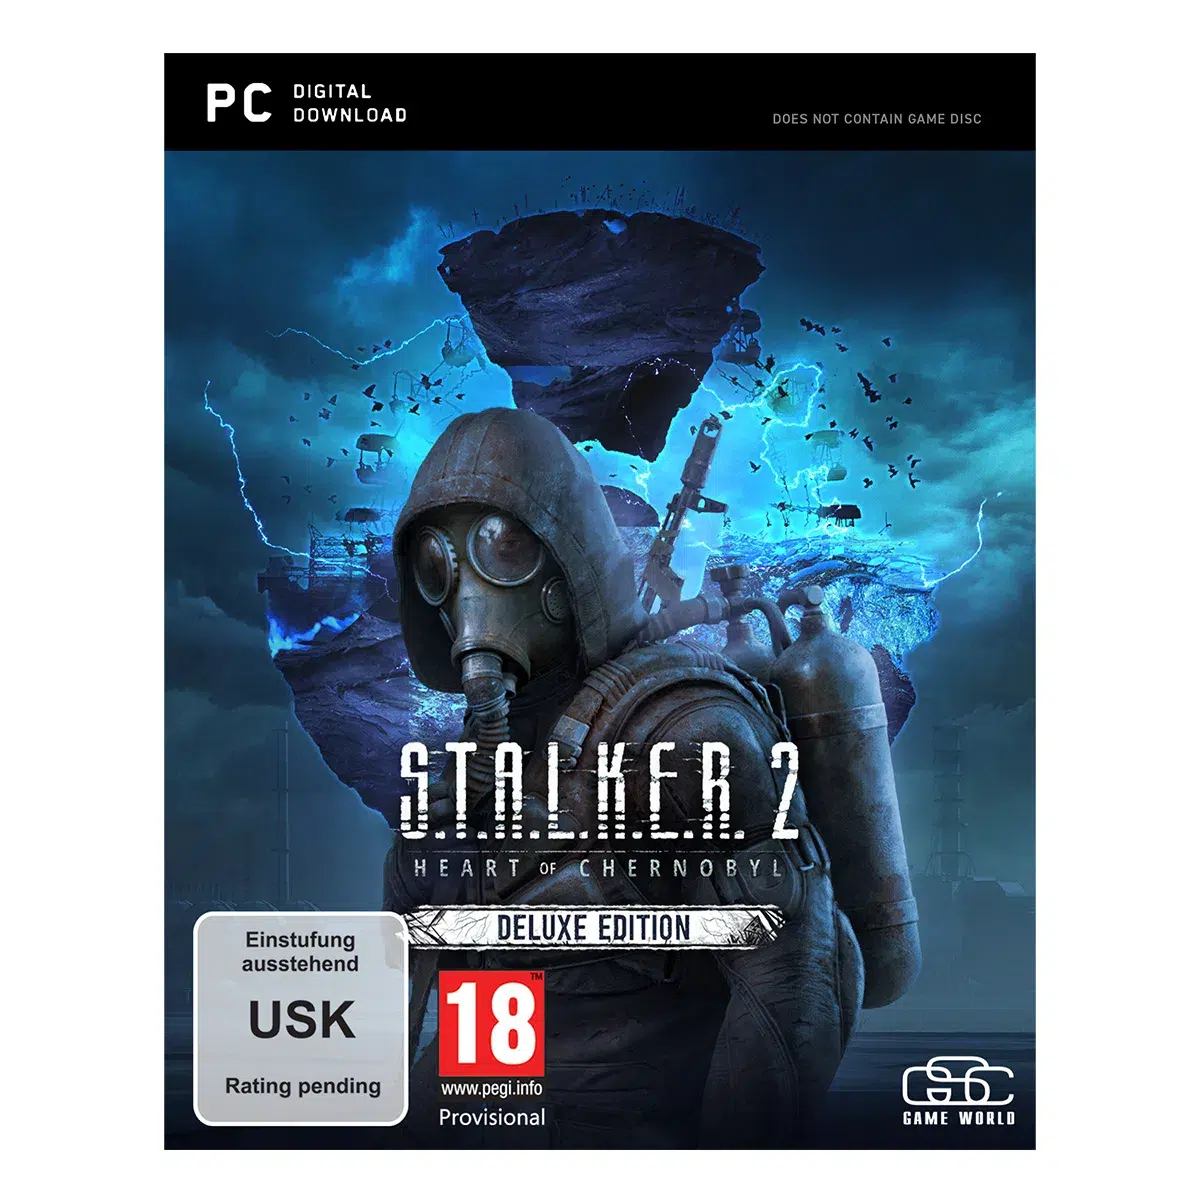 S.T.A.L.K.E.R. 2: Heart of Chornobyl Collector's Edition (PC) (INT)